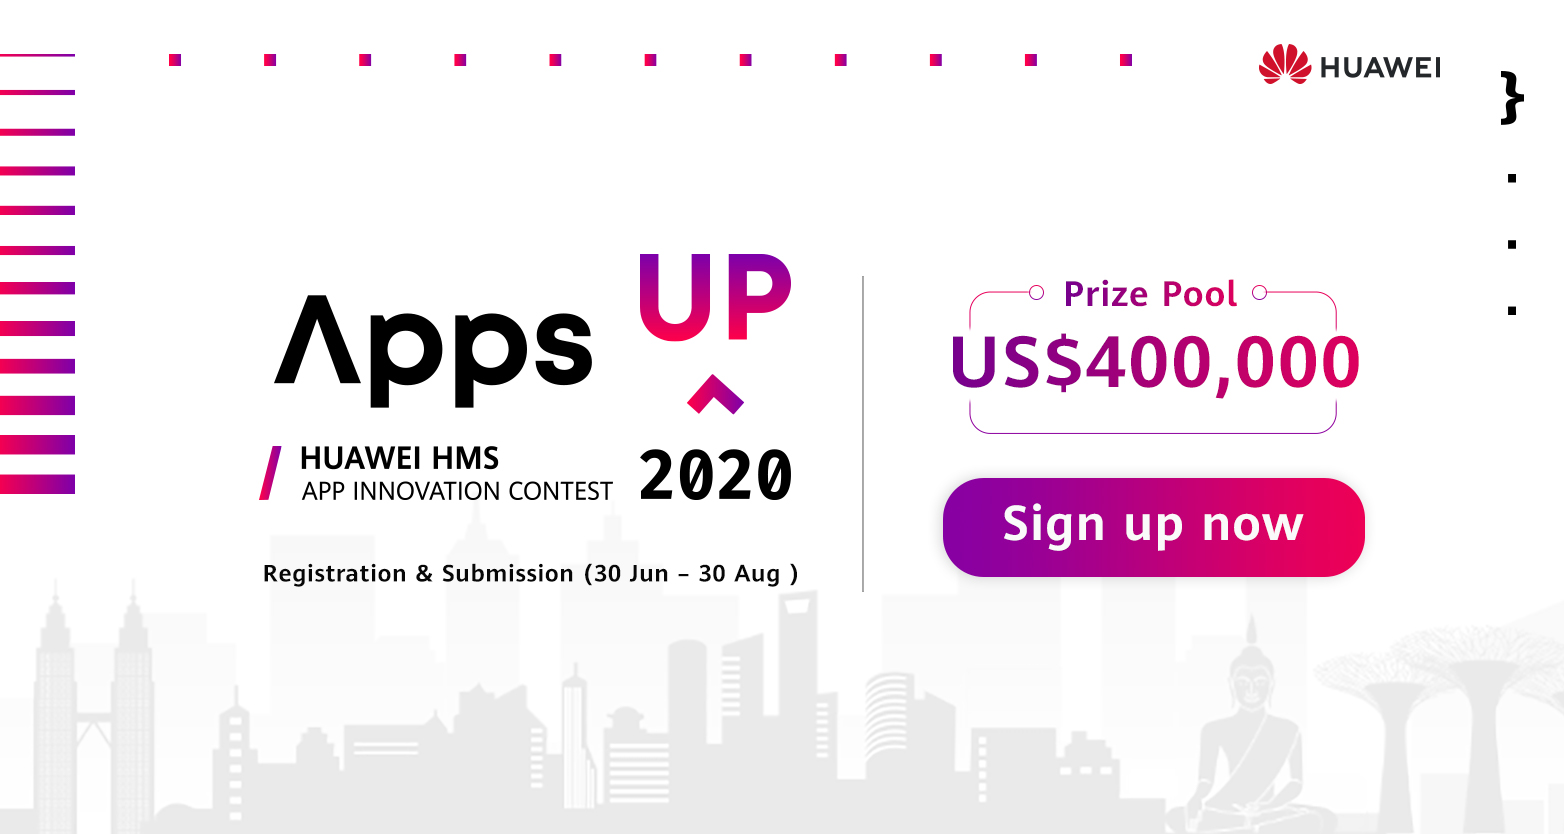 HUAWEI HMS App Innovation Contest, AppsUP goes global